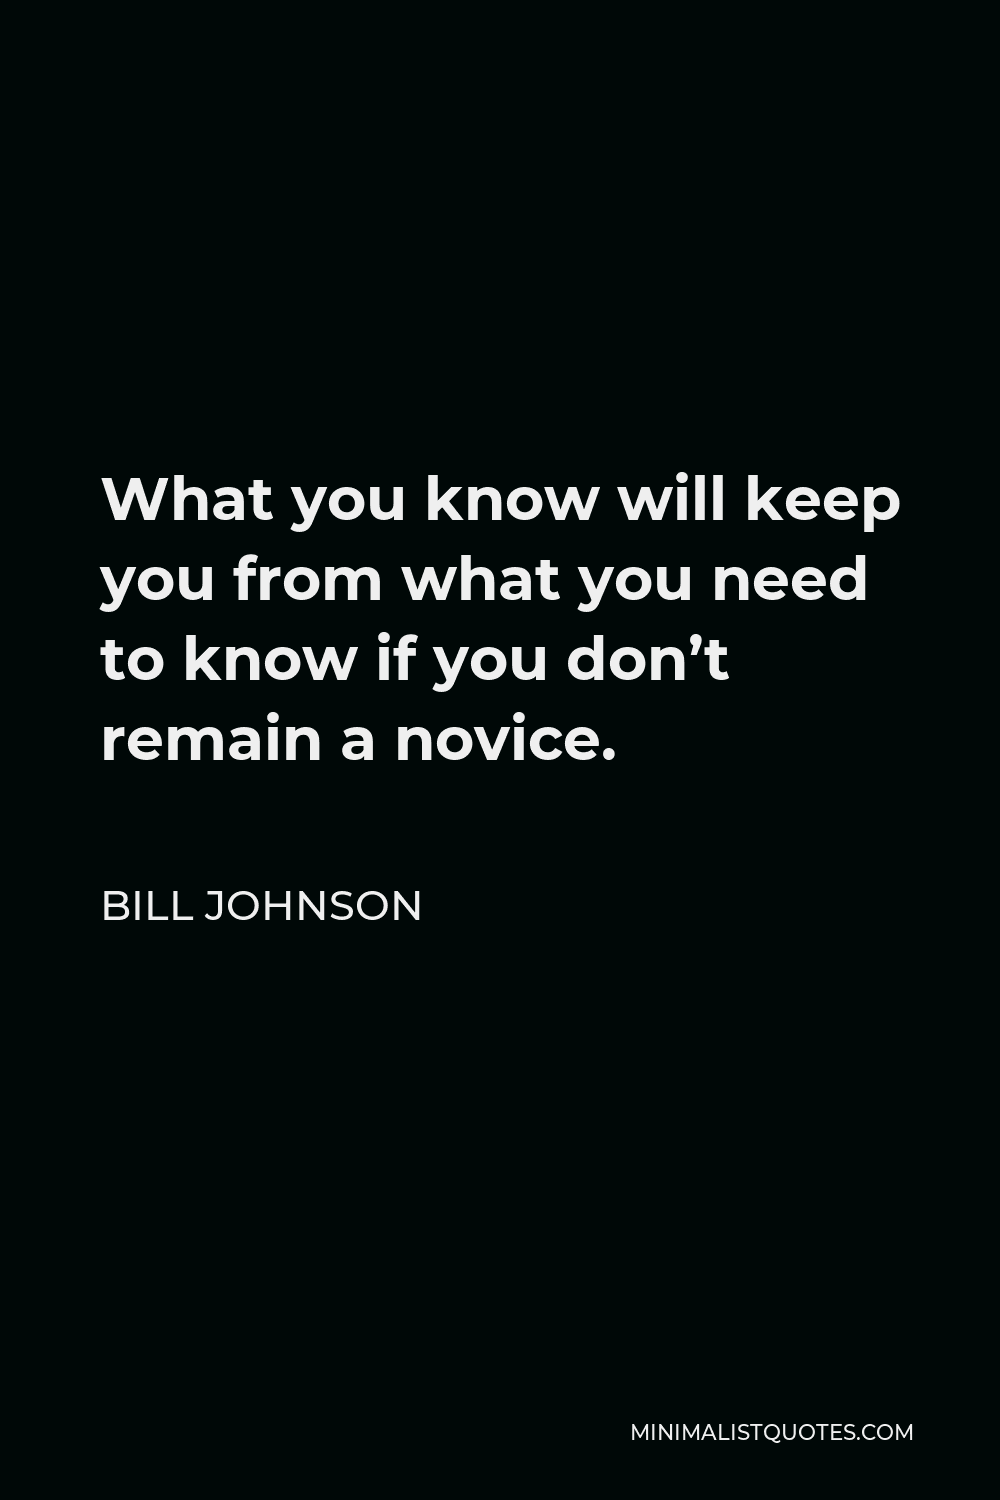 Bill Johnson Quote - What you know will keep you from what you need to know if you don’t remain a novice.